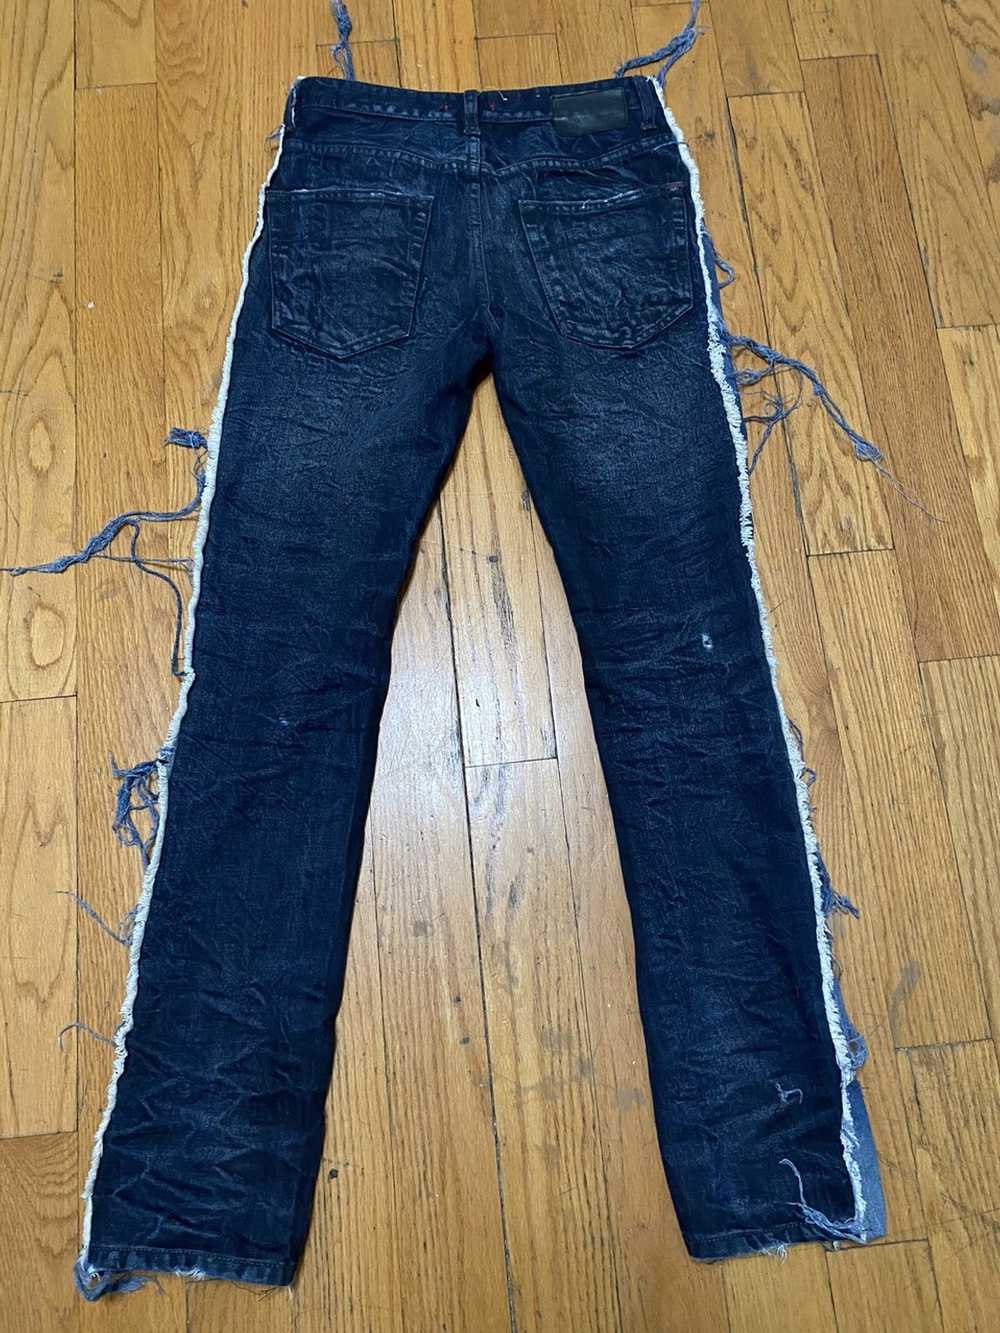 Japanese Brand Distress side patch jeans - image 2